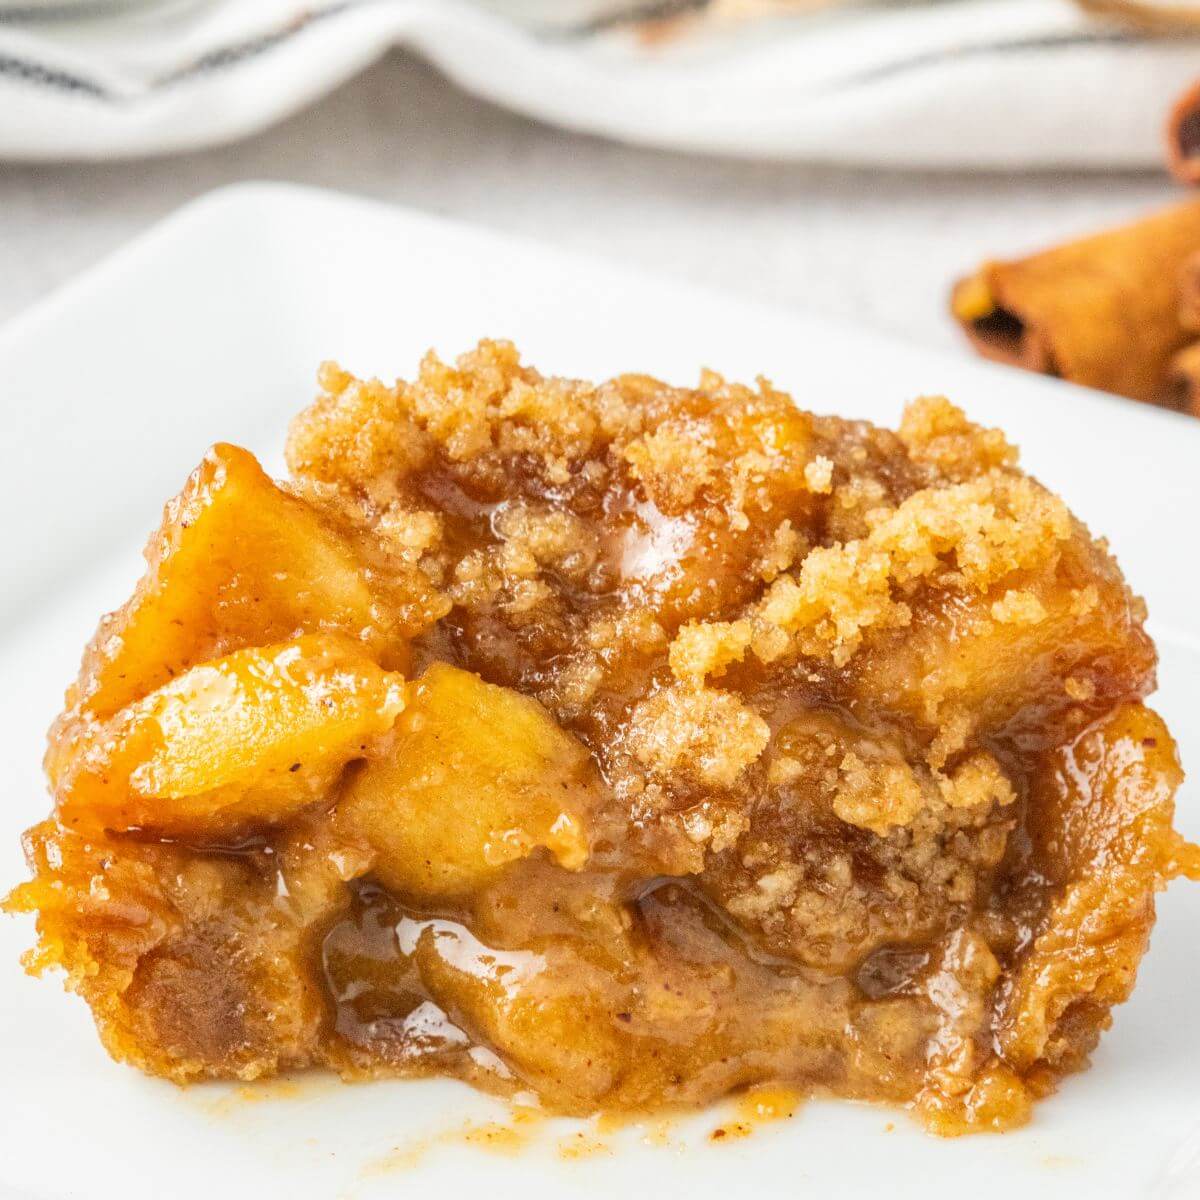 Mini apple pie on a plate with streusel topping and drizzle of caramel.